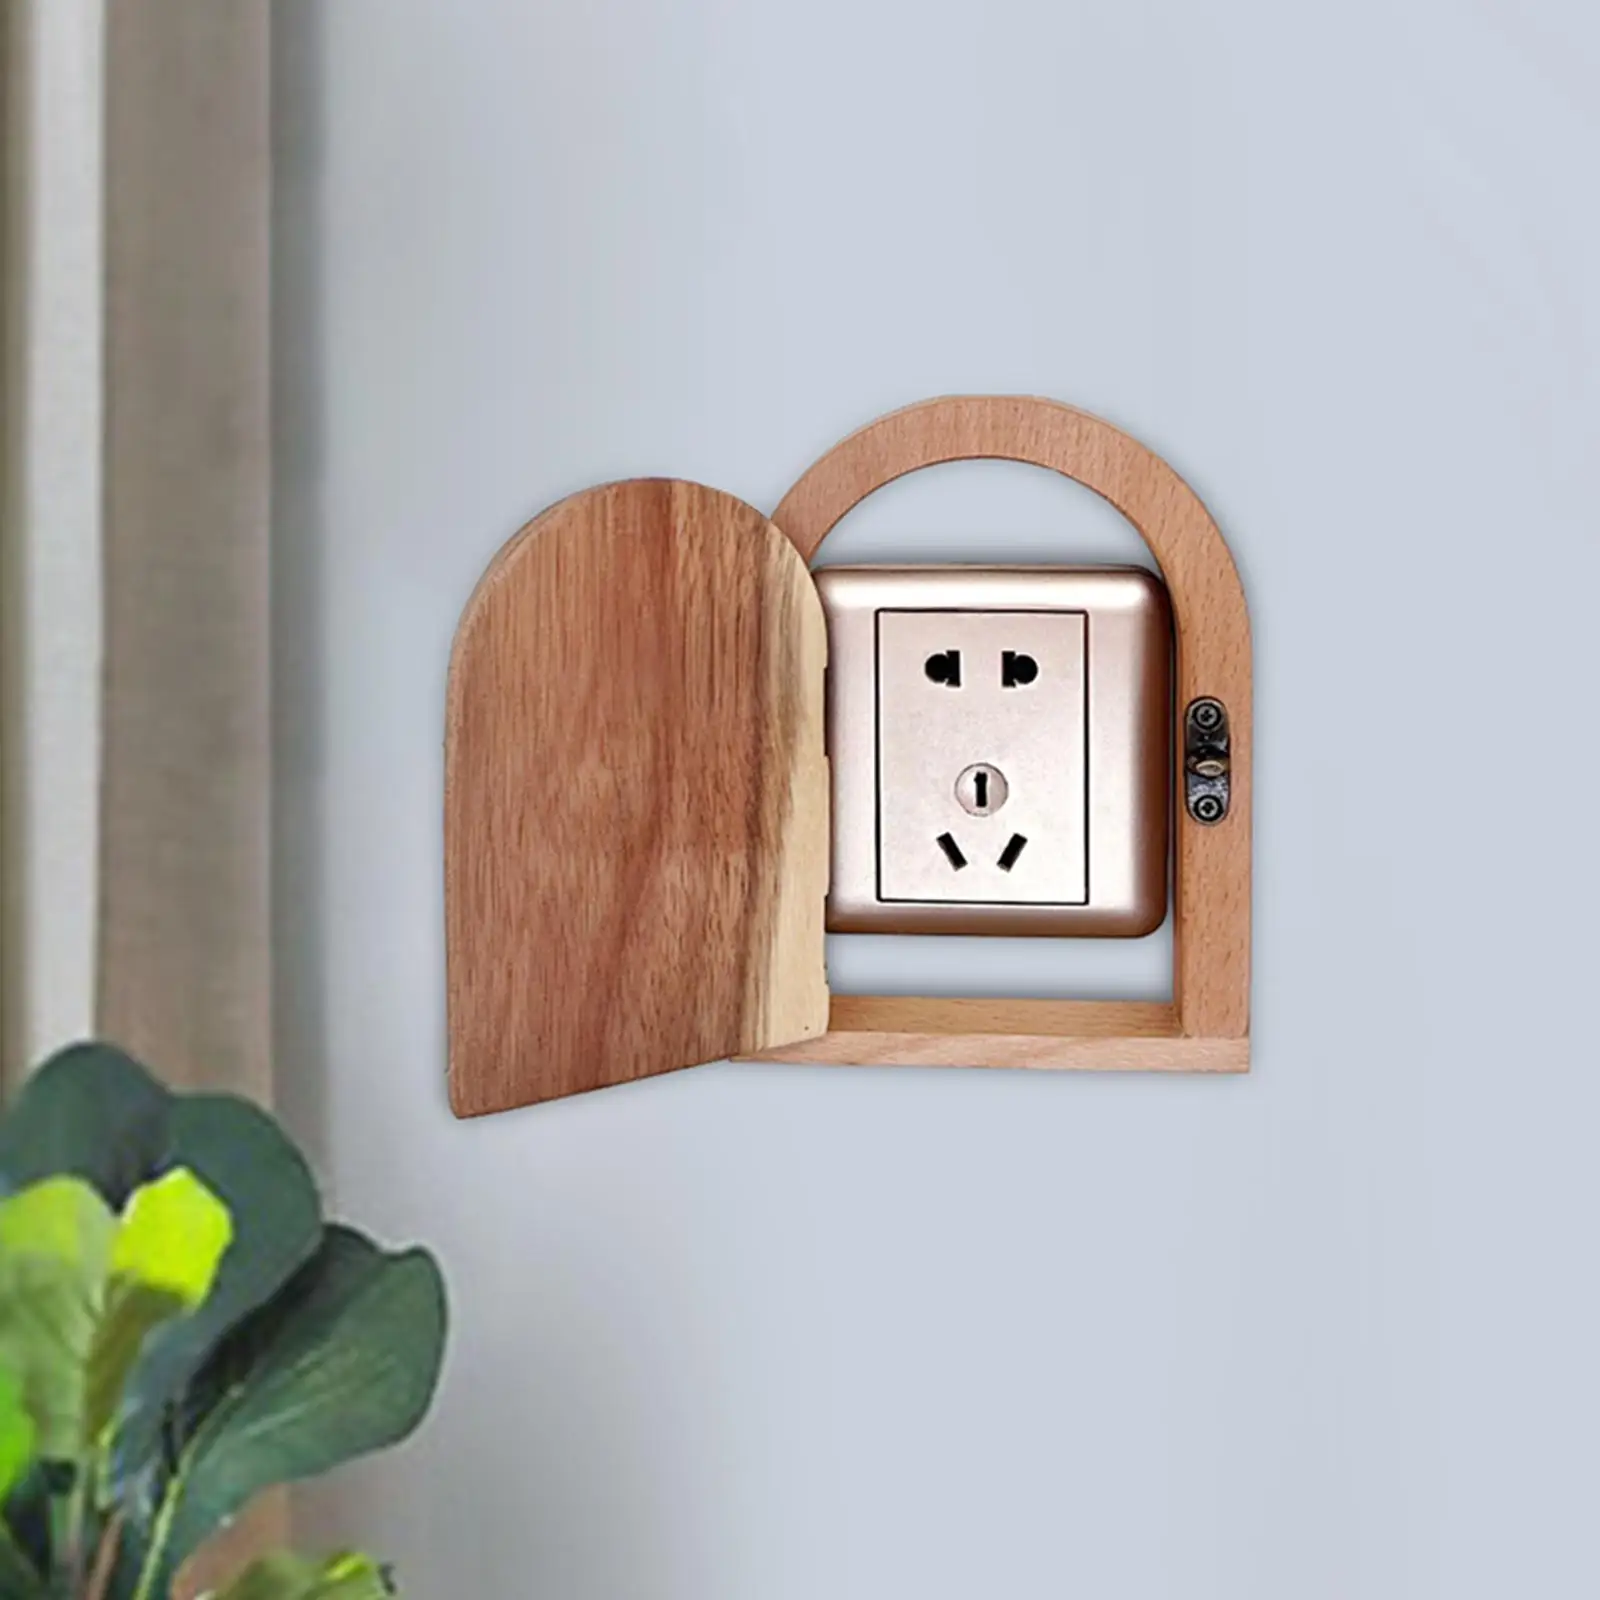 Outlet Covers Wood Wall Socket Box Dustproof Switch Cover Socket Protectors  Outlet Box for Office Home Restaurant Wall Workshop - AliExpress